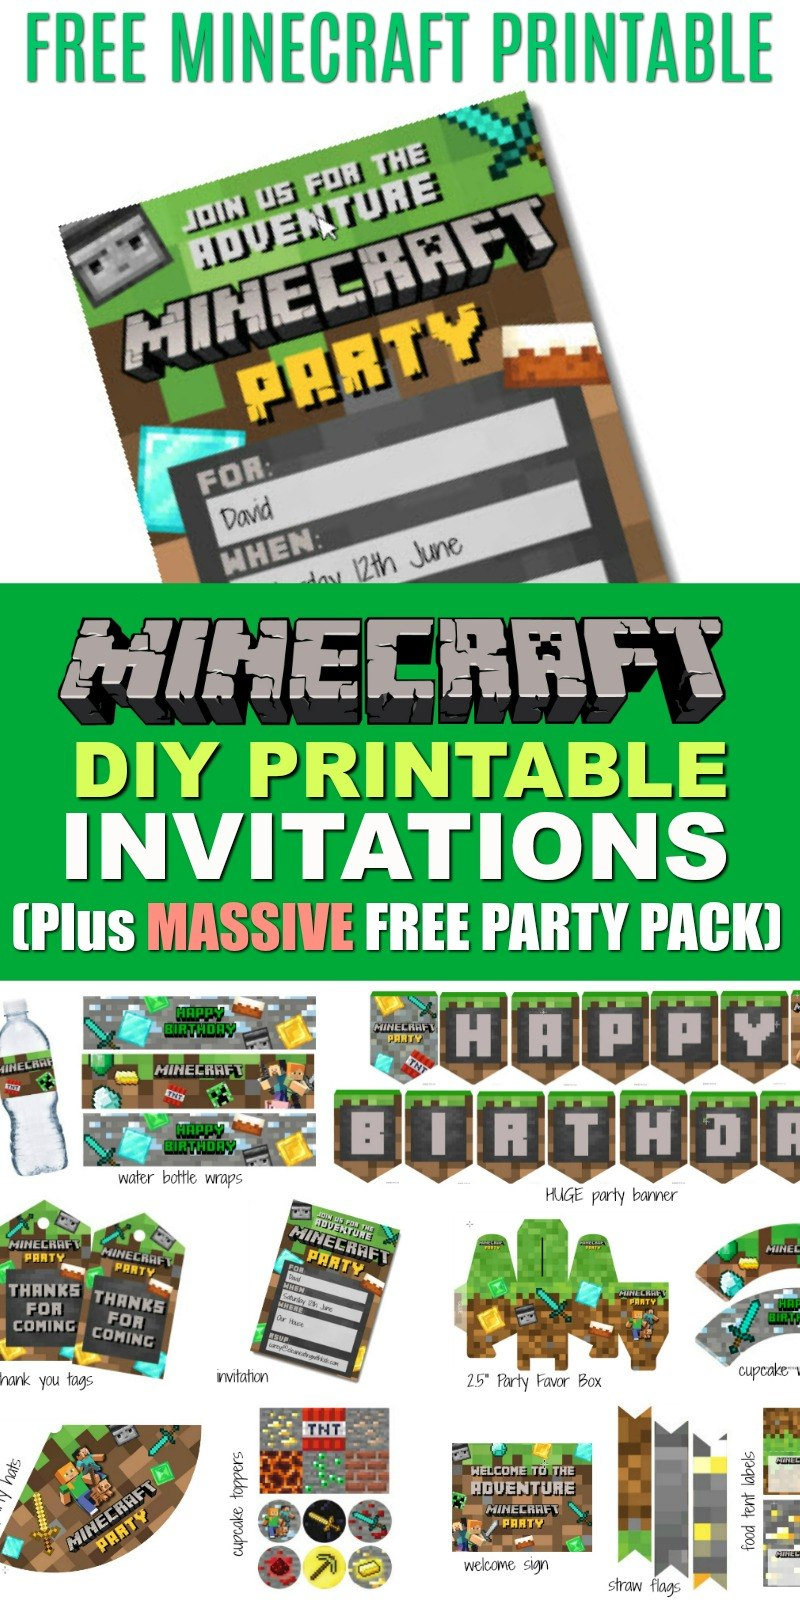 Free Diy Printable Minecraft Birthday Invitation  Clean Eating With pertaining to Minecraft Birthday Card Template